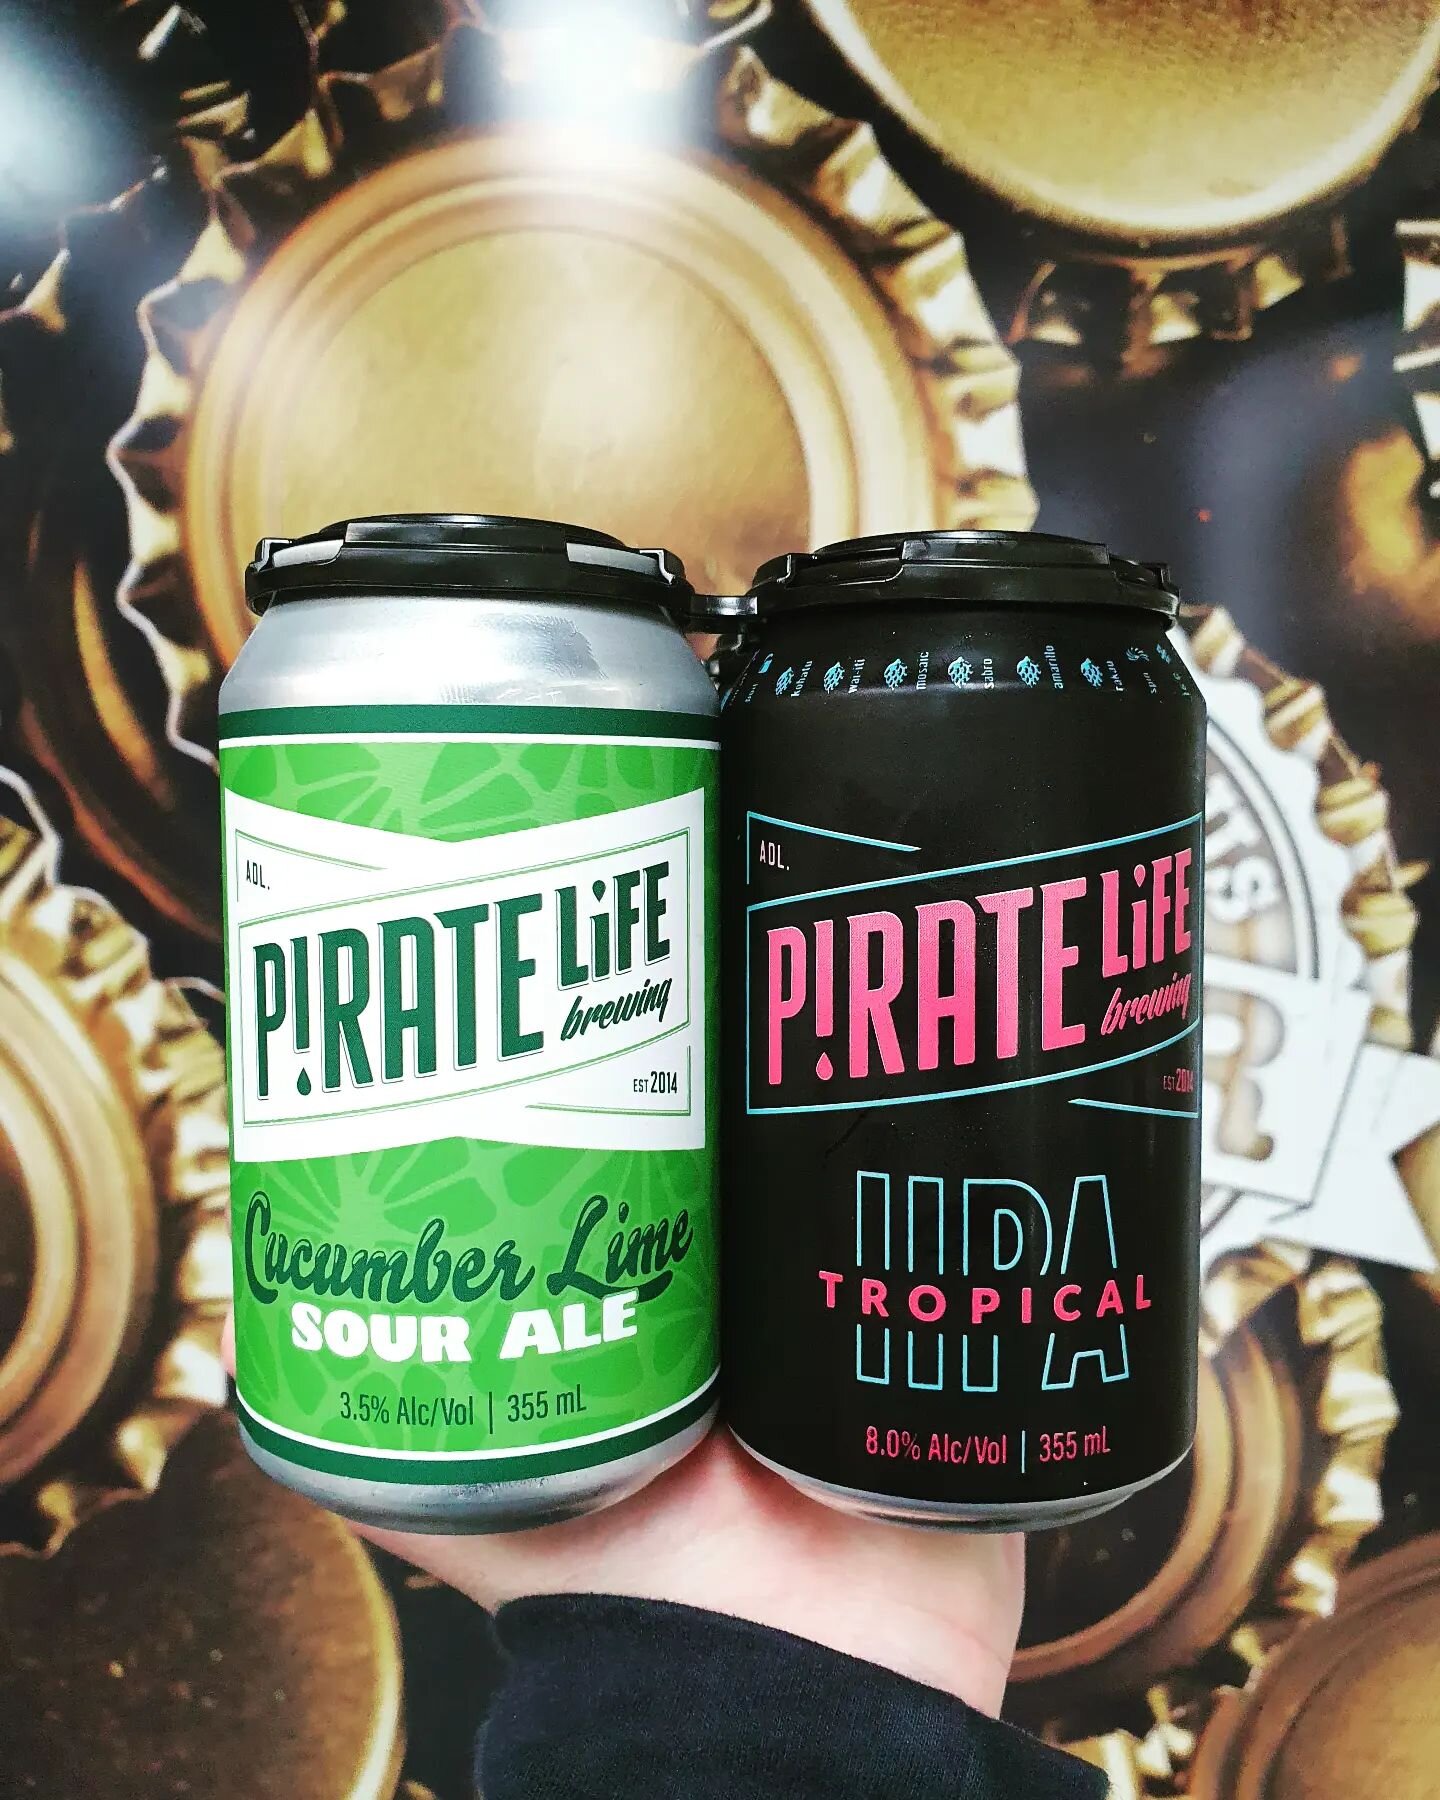 Fresh drops from @piratelifebeer instore this week. A new comer with a refreshing cucumber and lime sour sitting at a tasty 3.5% ABV, as well as a now local favourite in the Tropical IIPA at a respectable 8% ABV. Plenty of these and more crafties in 